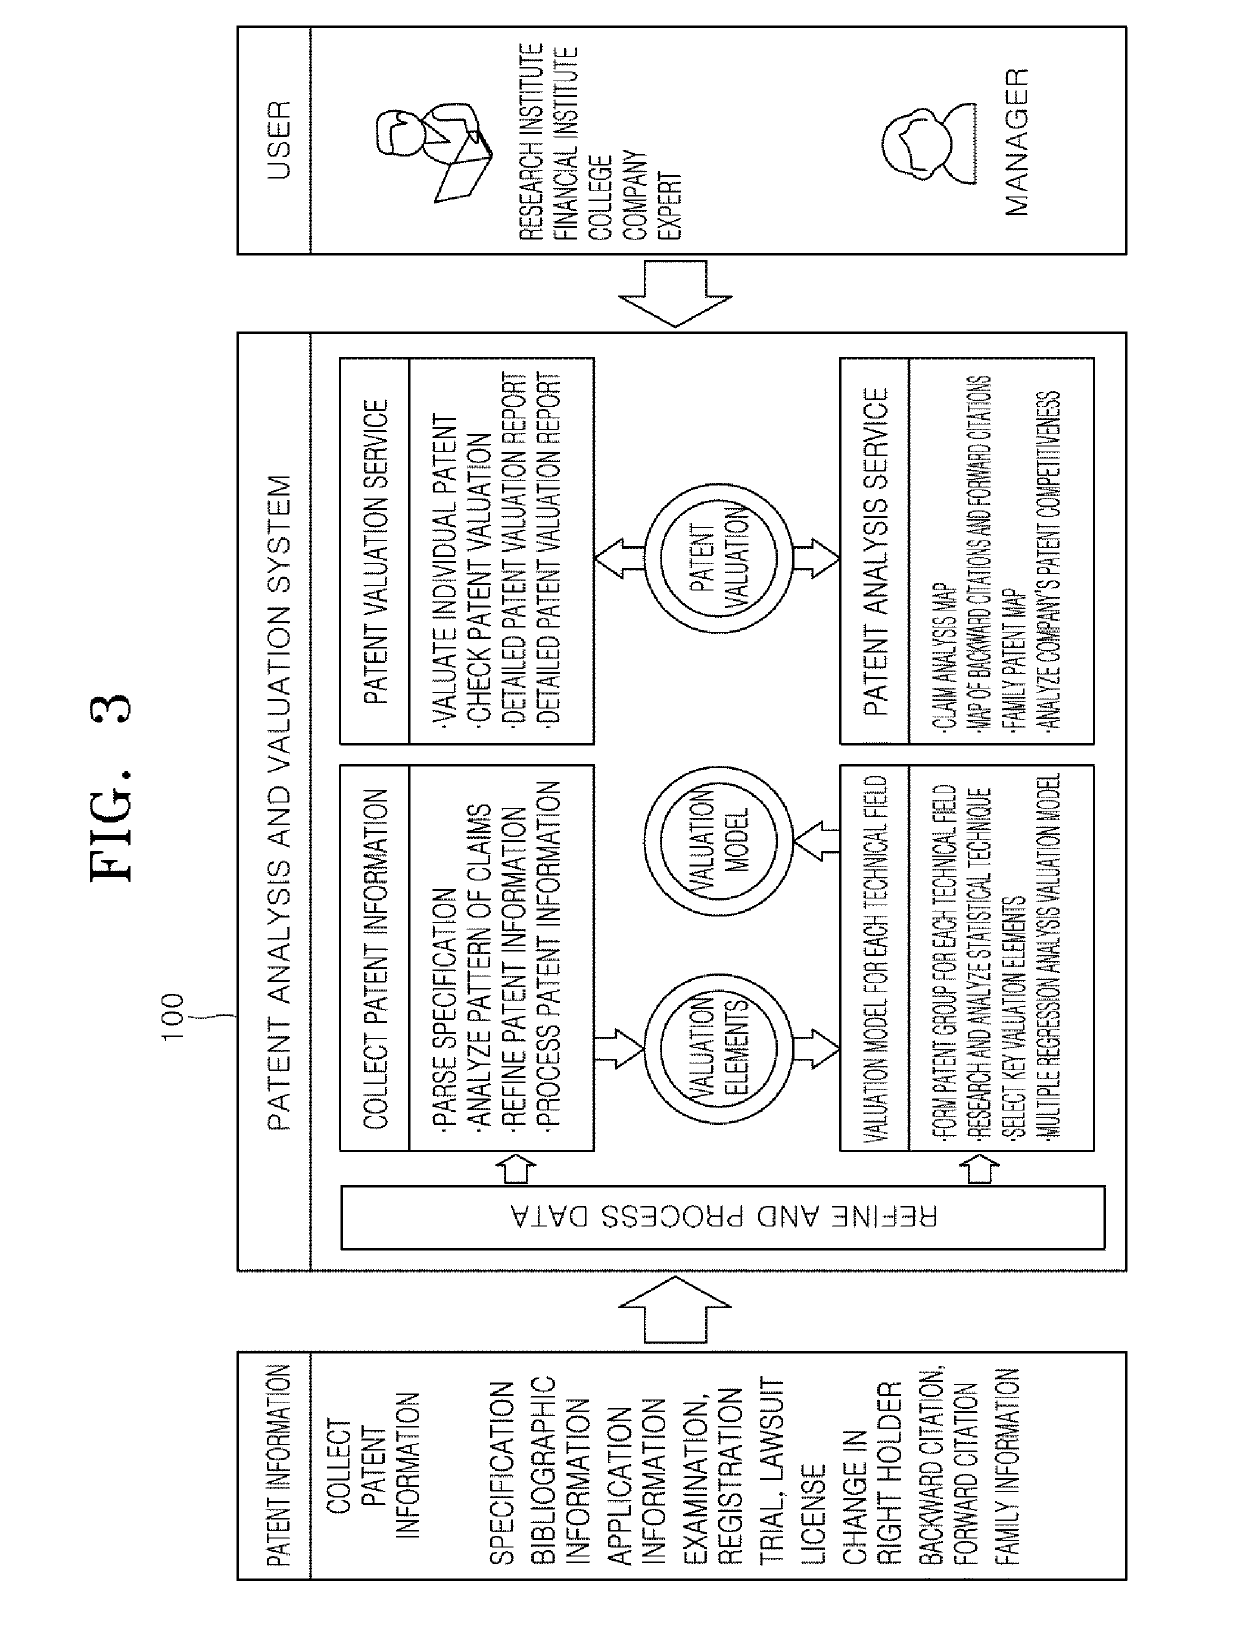 System and method for valuating patent using multiple regression model and system and method for building patent valuation model using multiple regression model